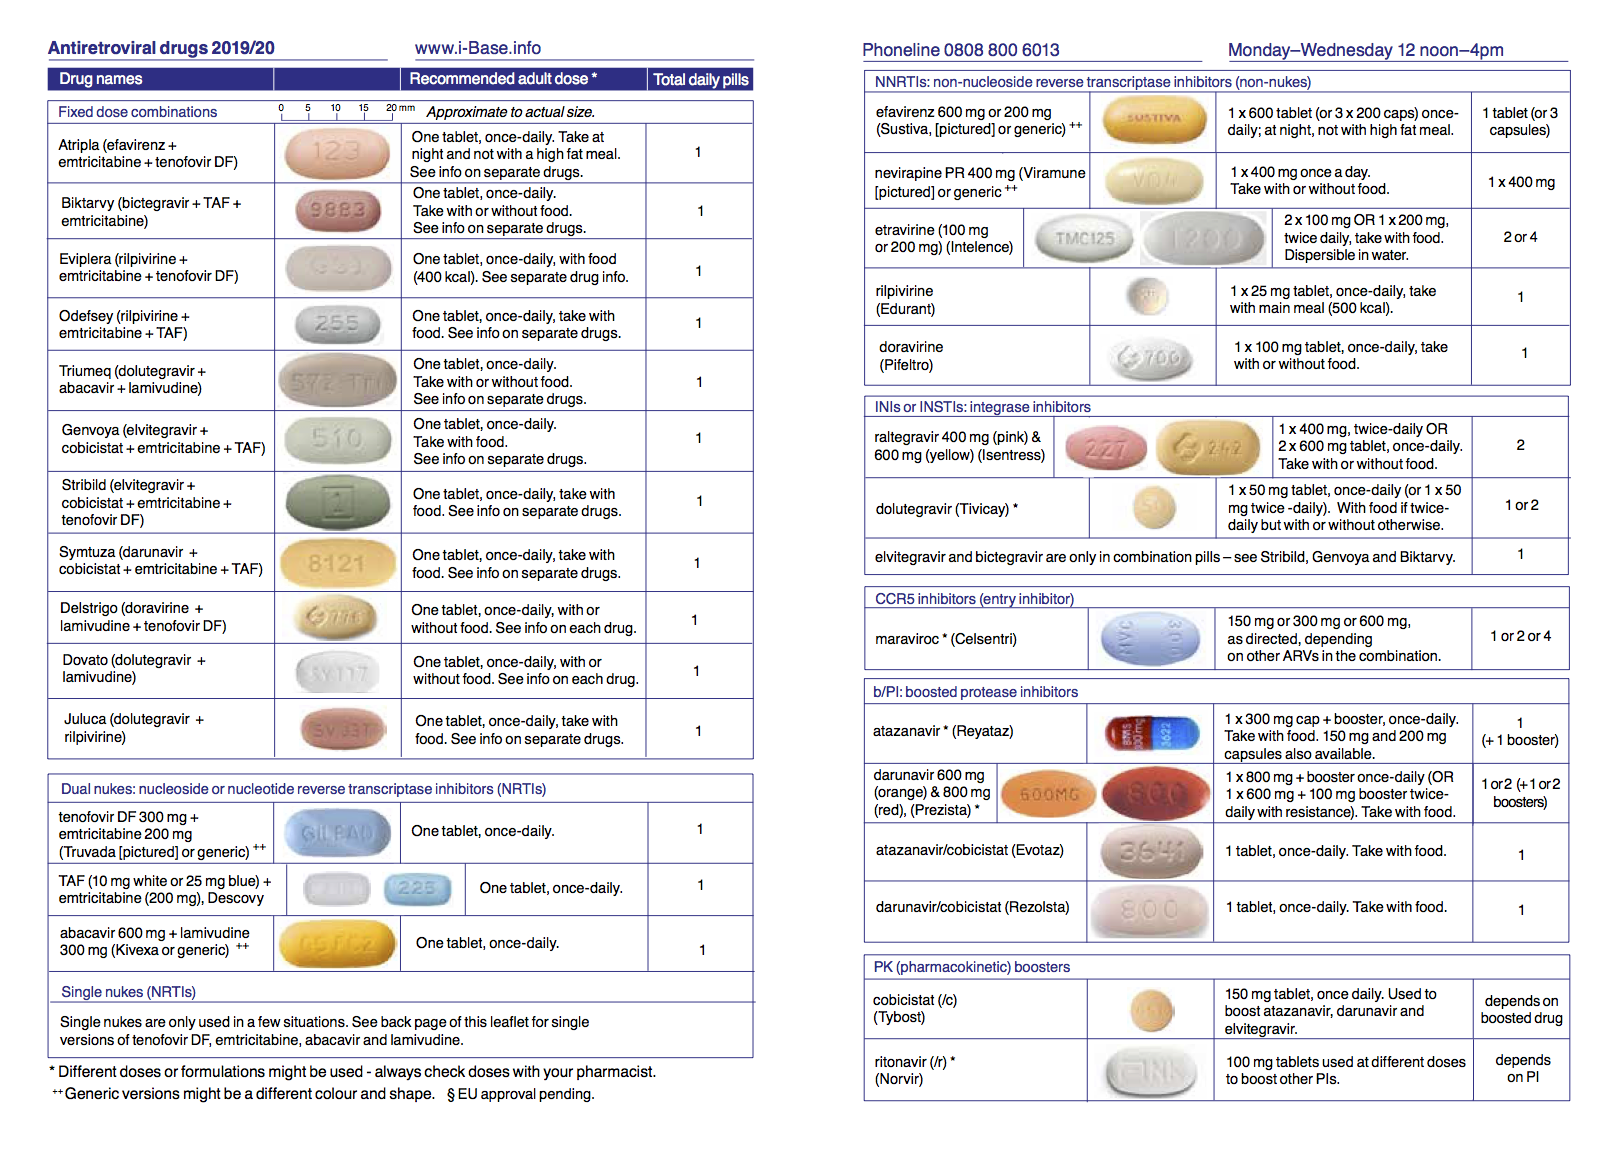 Antiretroviral drugs: illustrated pill chart | Guides | HIV i-Base